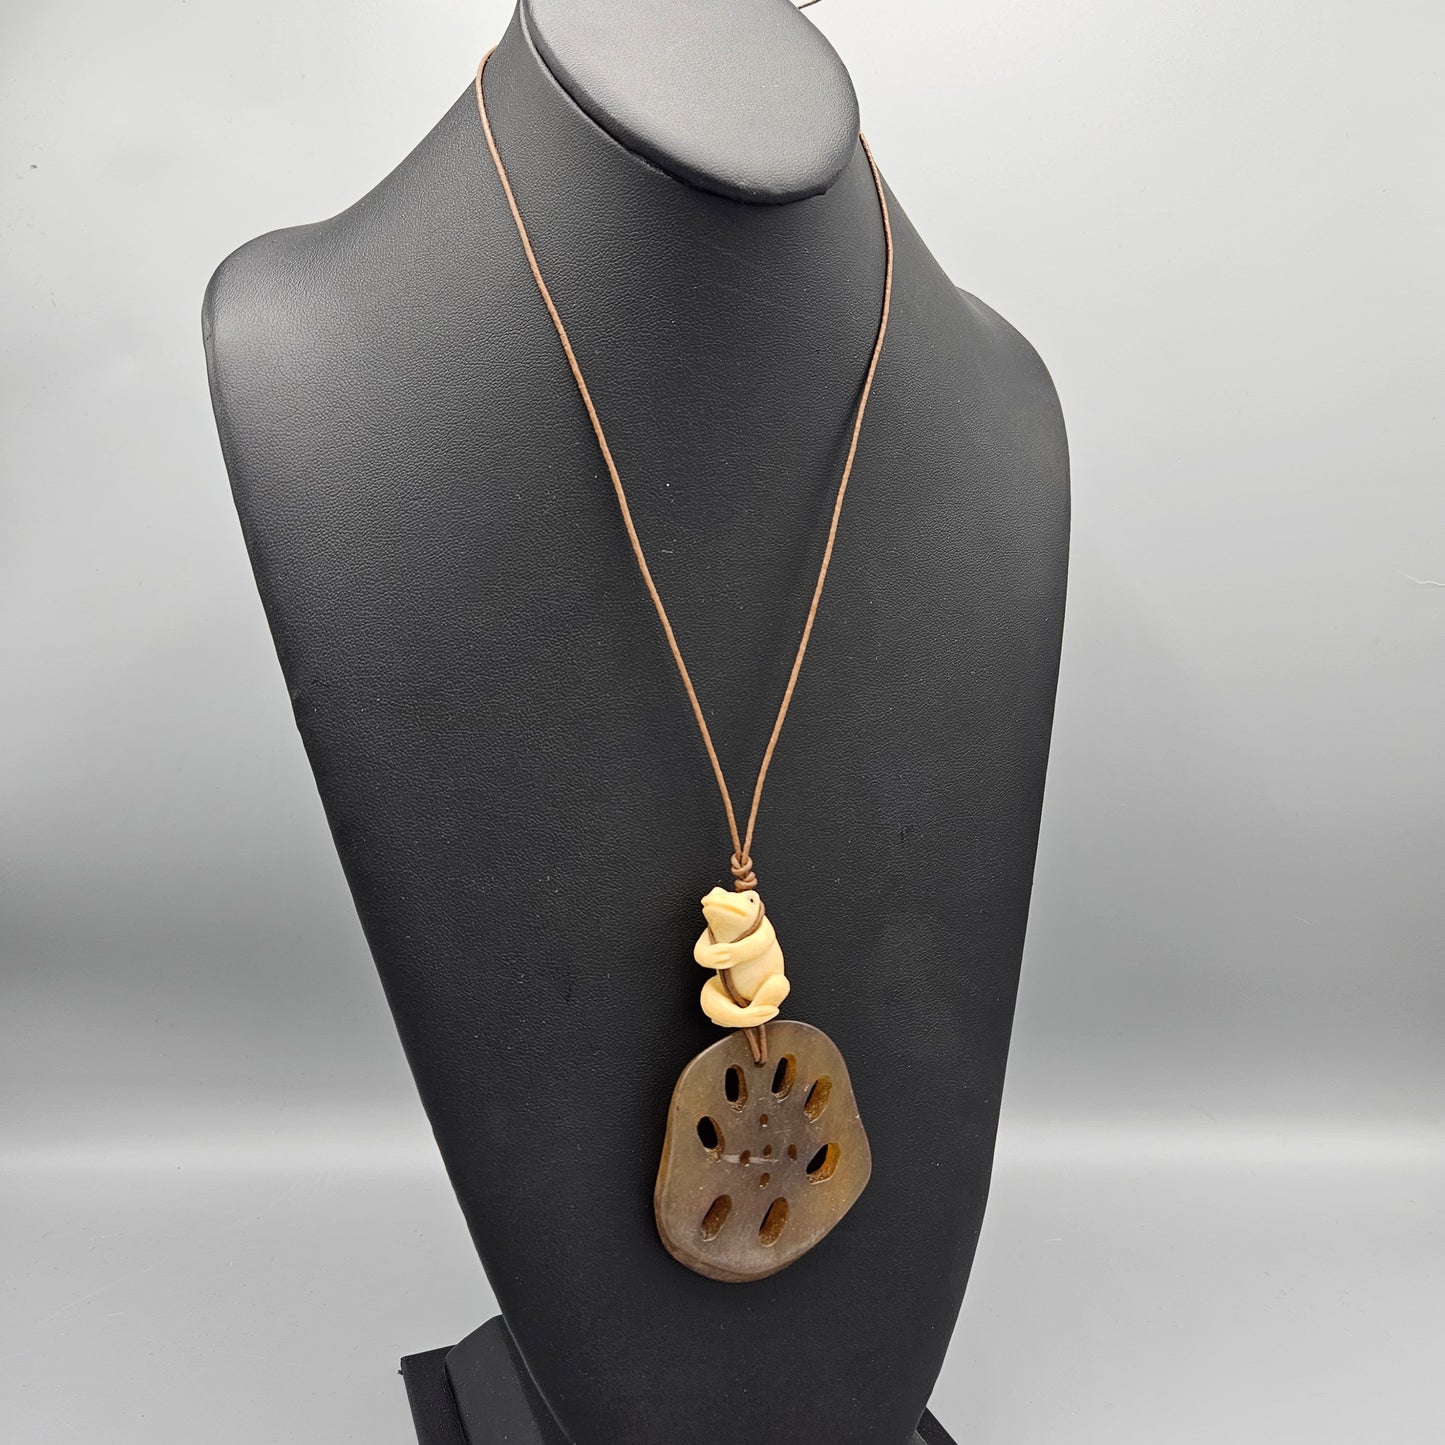 Vintage Carved Frog with Brown Stone Necklace